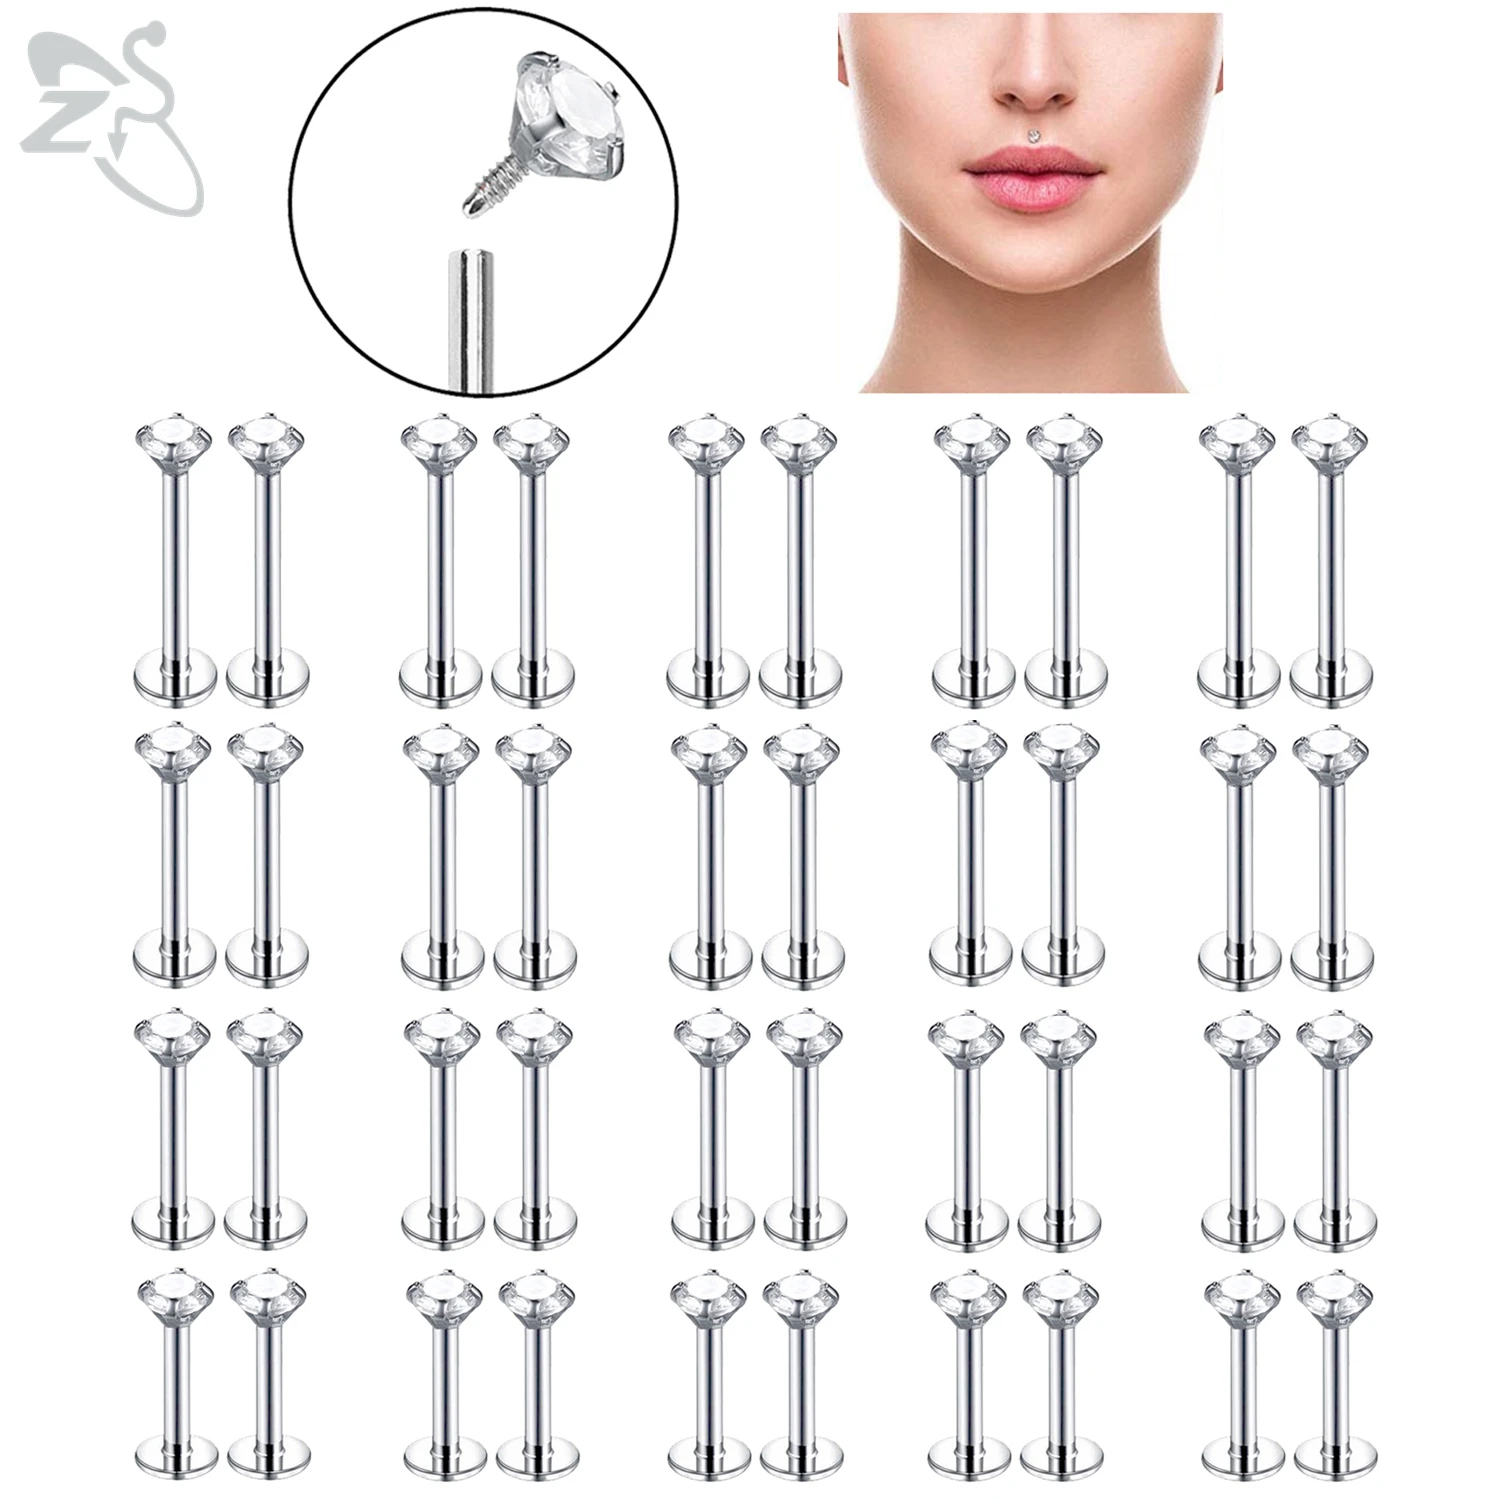 

ZS 10 Pcs/Lot 16G Stainless Steel Labret Lip Piercing Set CZ Crystal Cartilage Tragus Helix Conch Piercings Jewelry 6/8/10/12MM